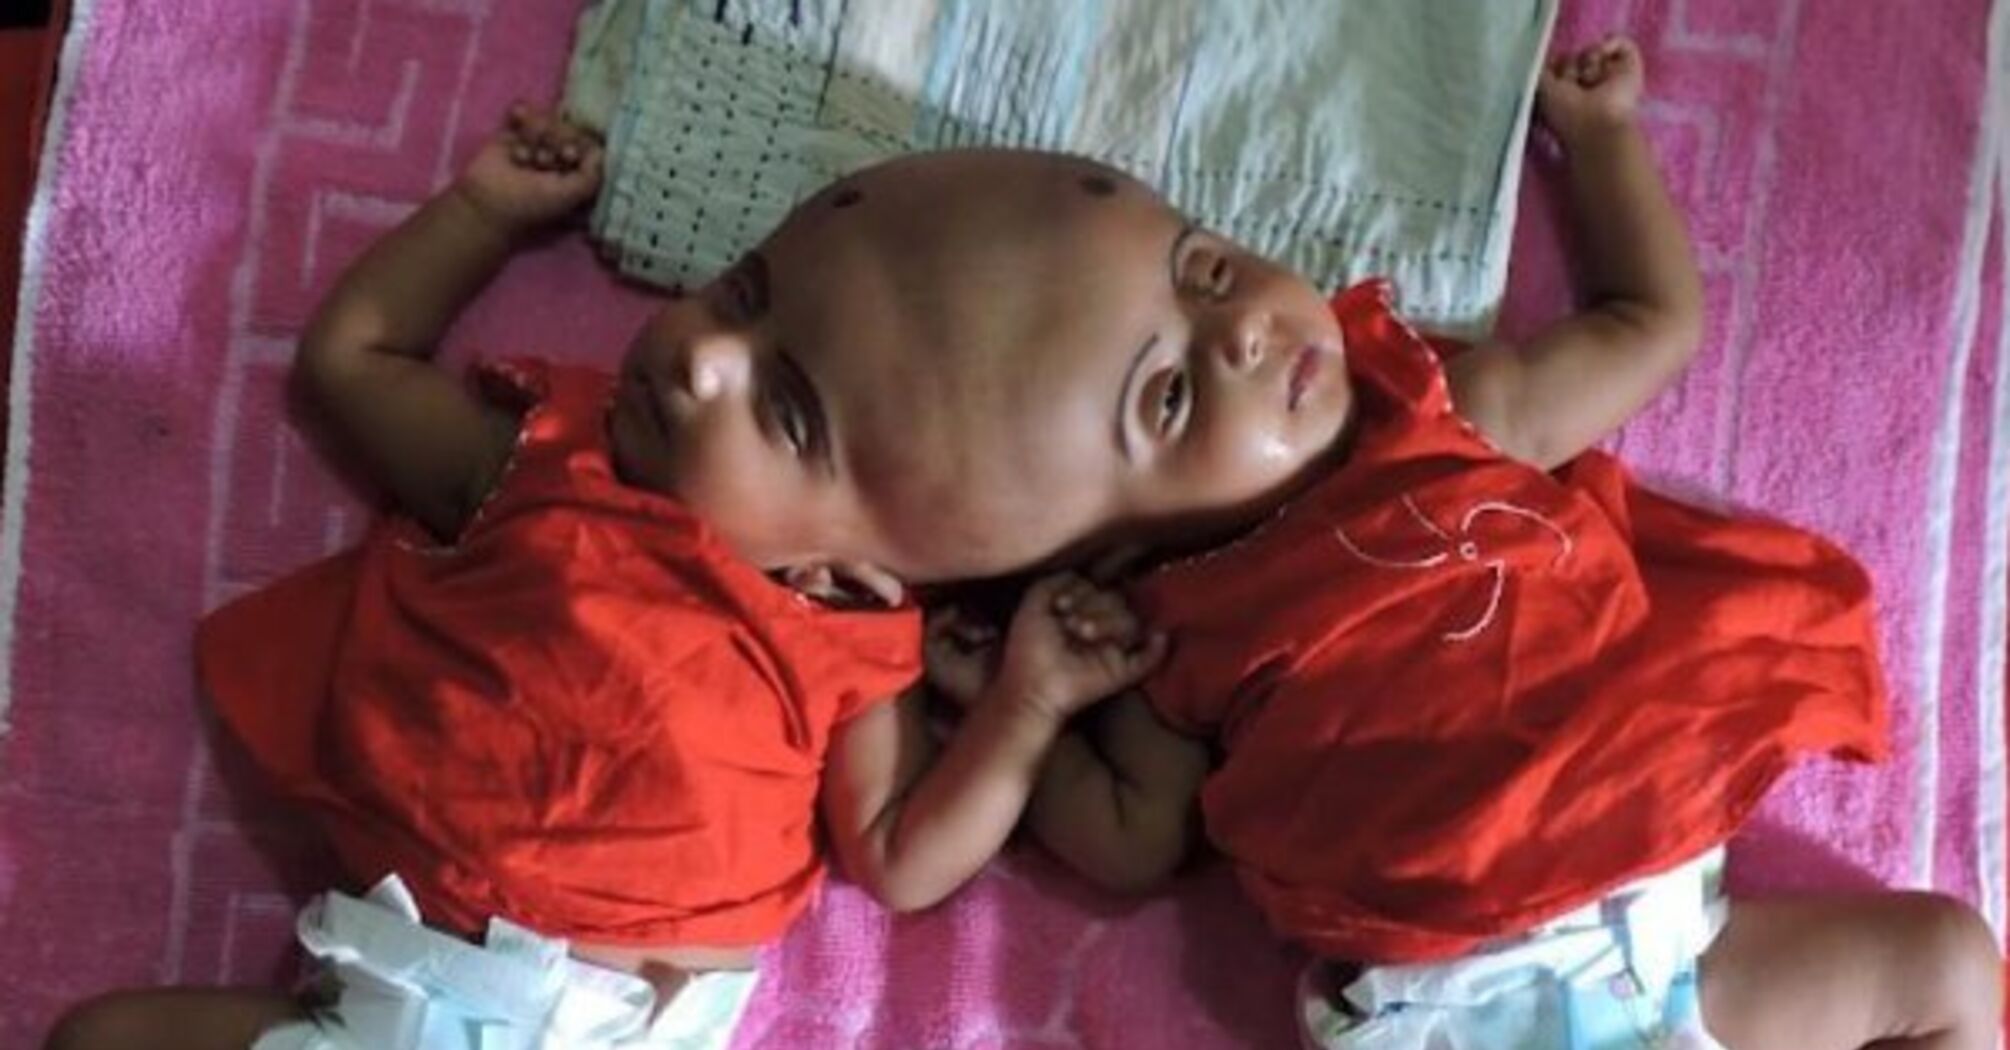 Siamese twins share what will happen to the other if one of them dies